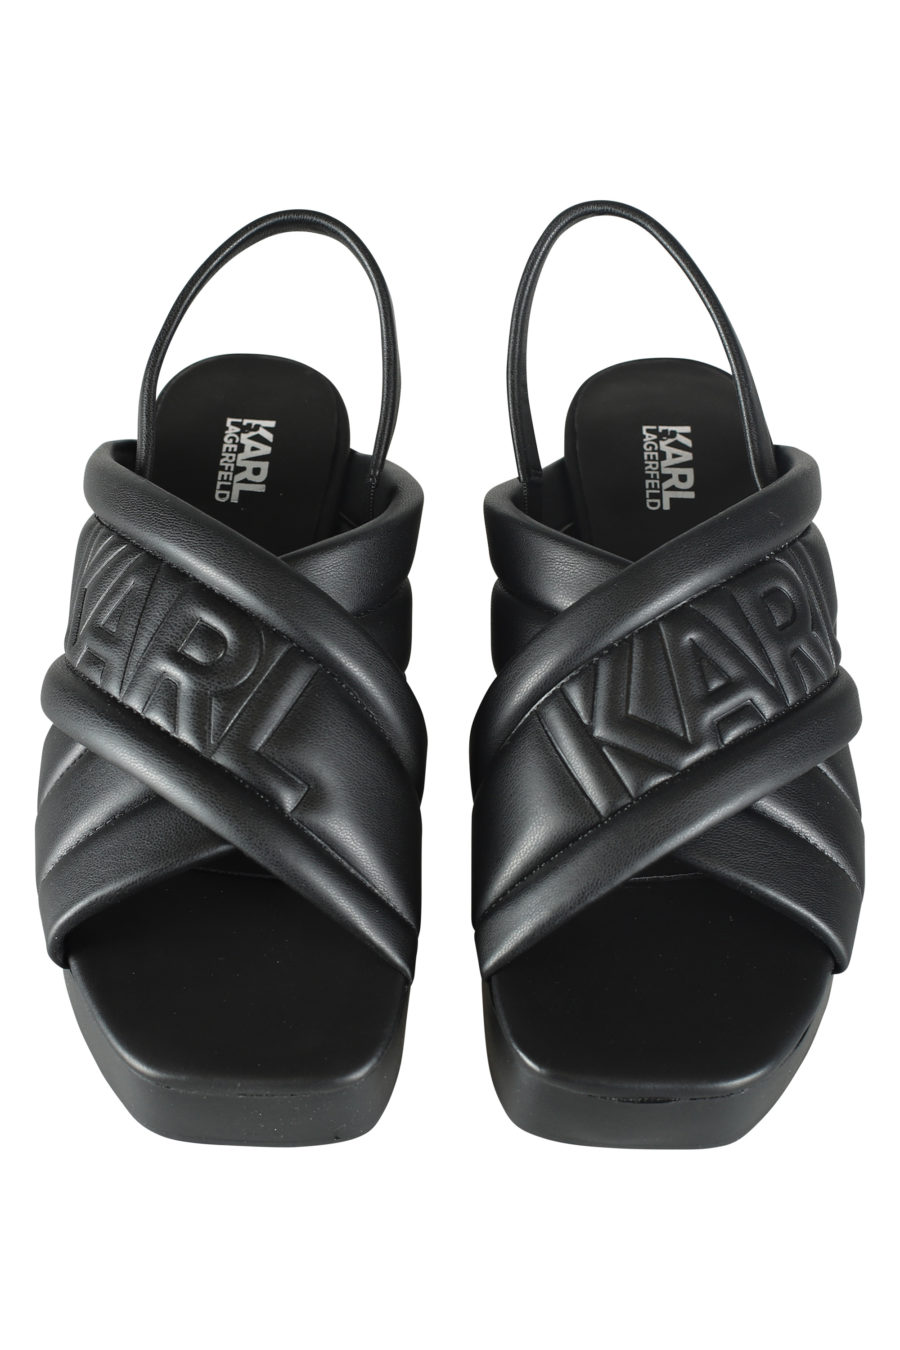 Black cushioned sandals with black logo and platform - IMG 5359